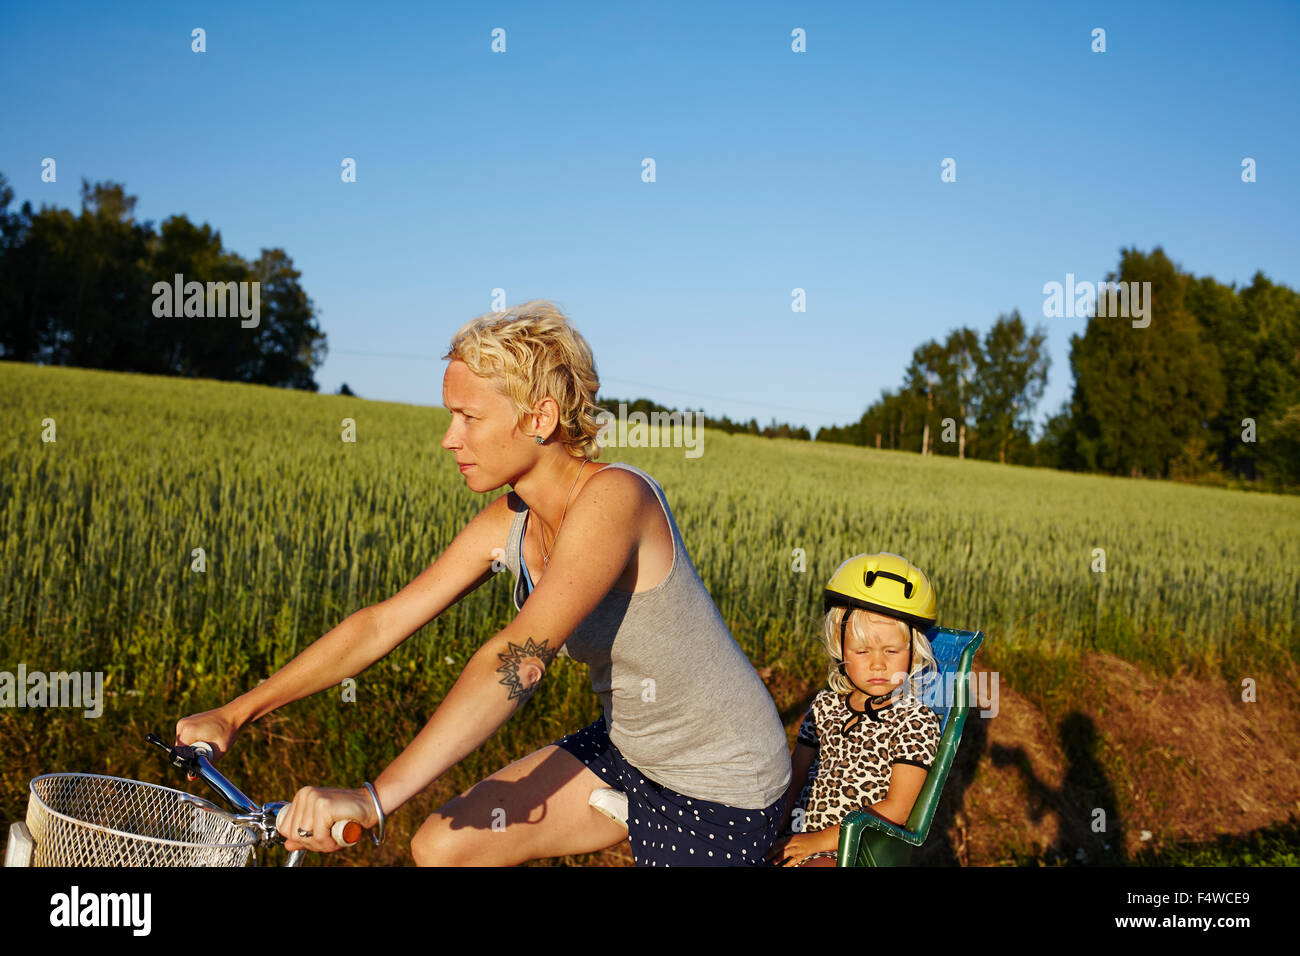 Woman with daughter (4-5) riding bike Stock Photo